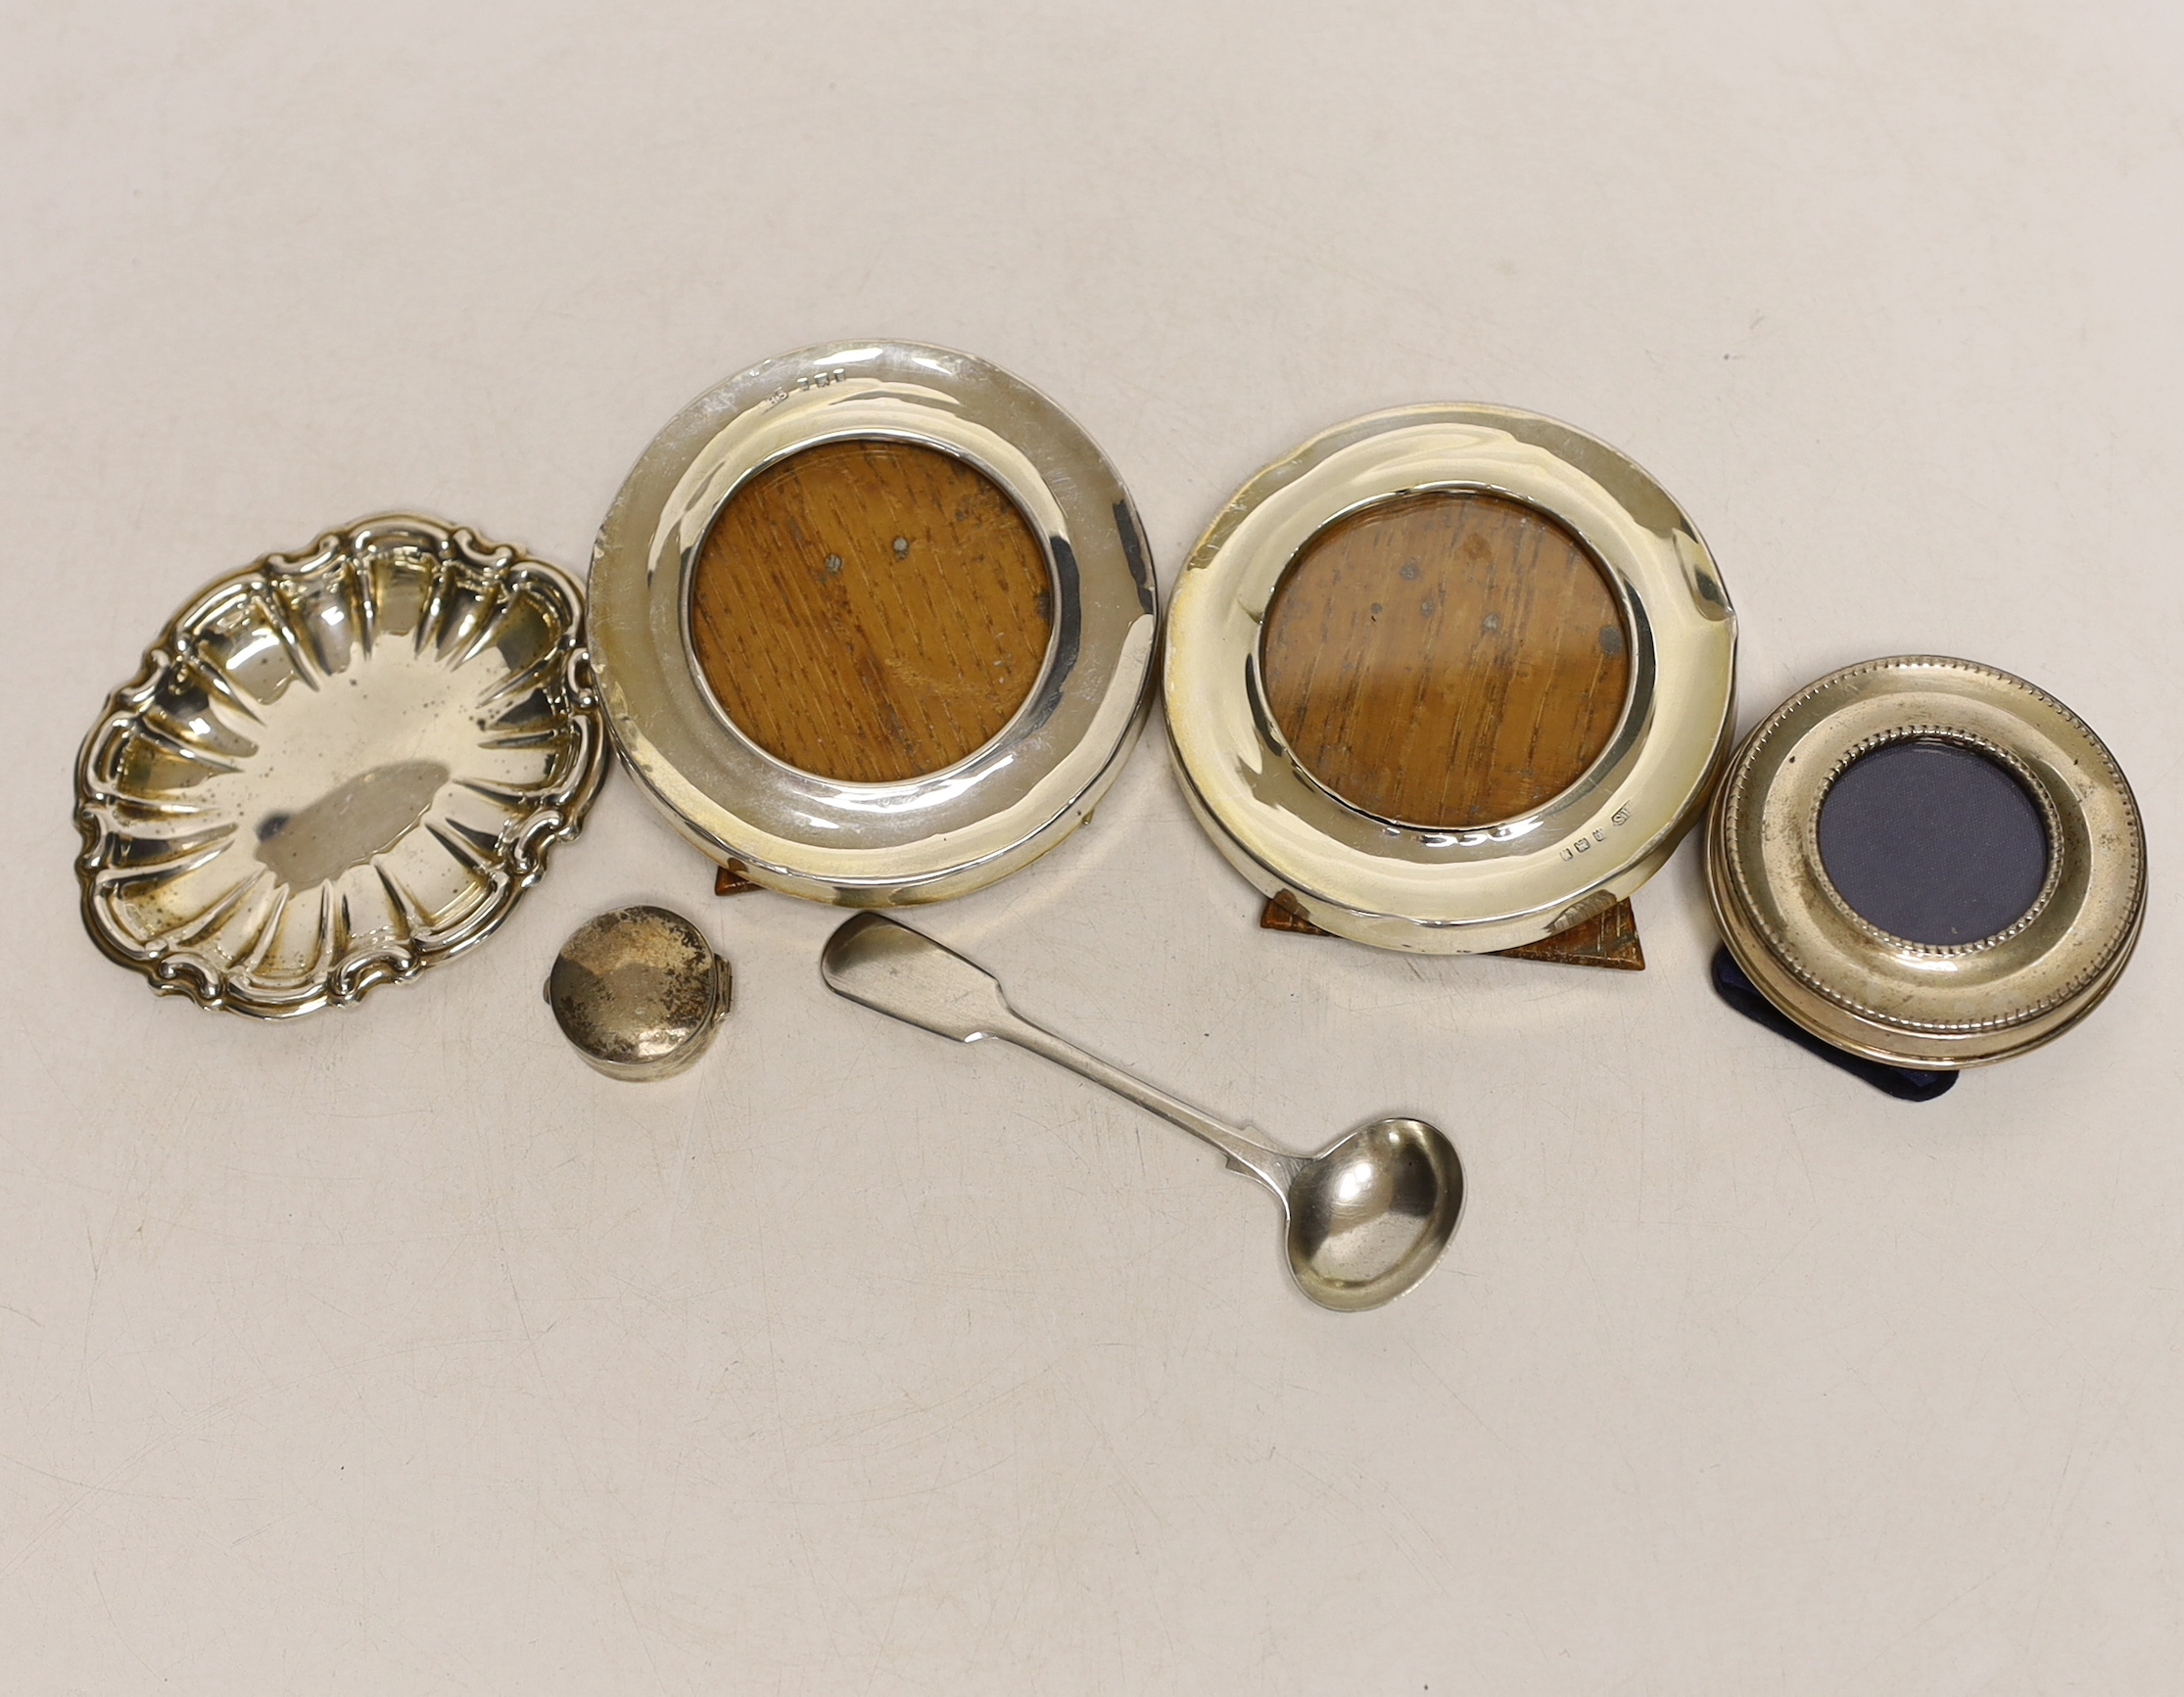 A small pair of George V silver mounted circular photograph frames, London, 1921, 75mm and four other items including a silver pill box and condiment spoon and small frame.